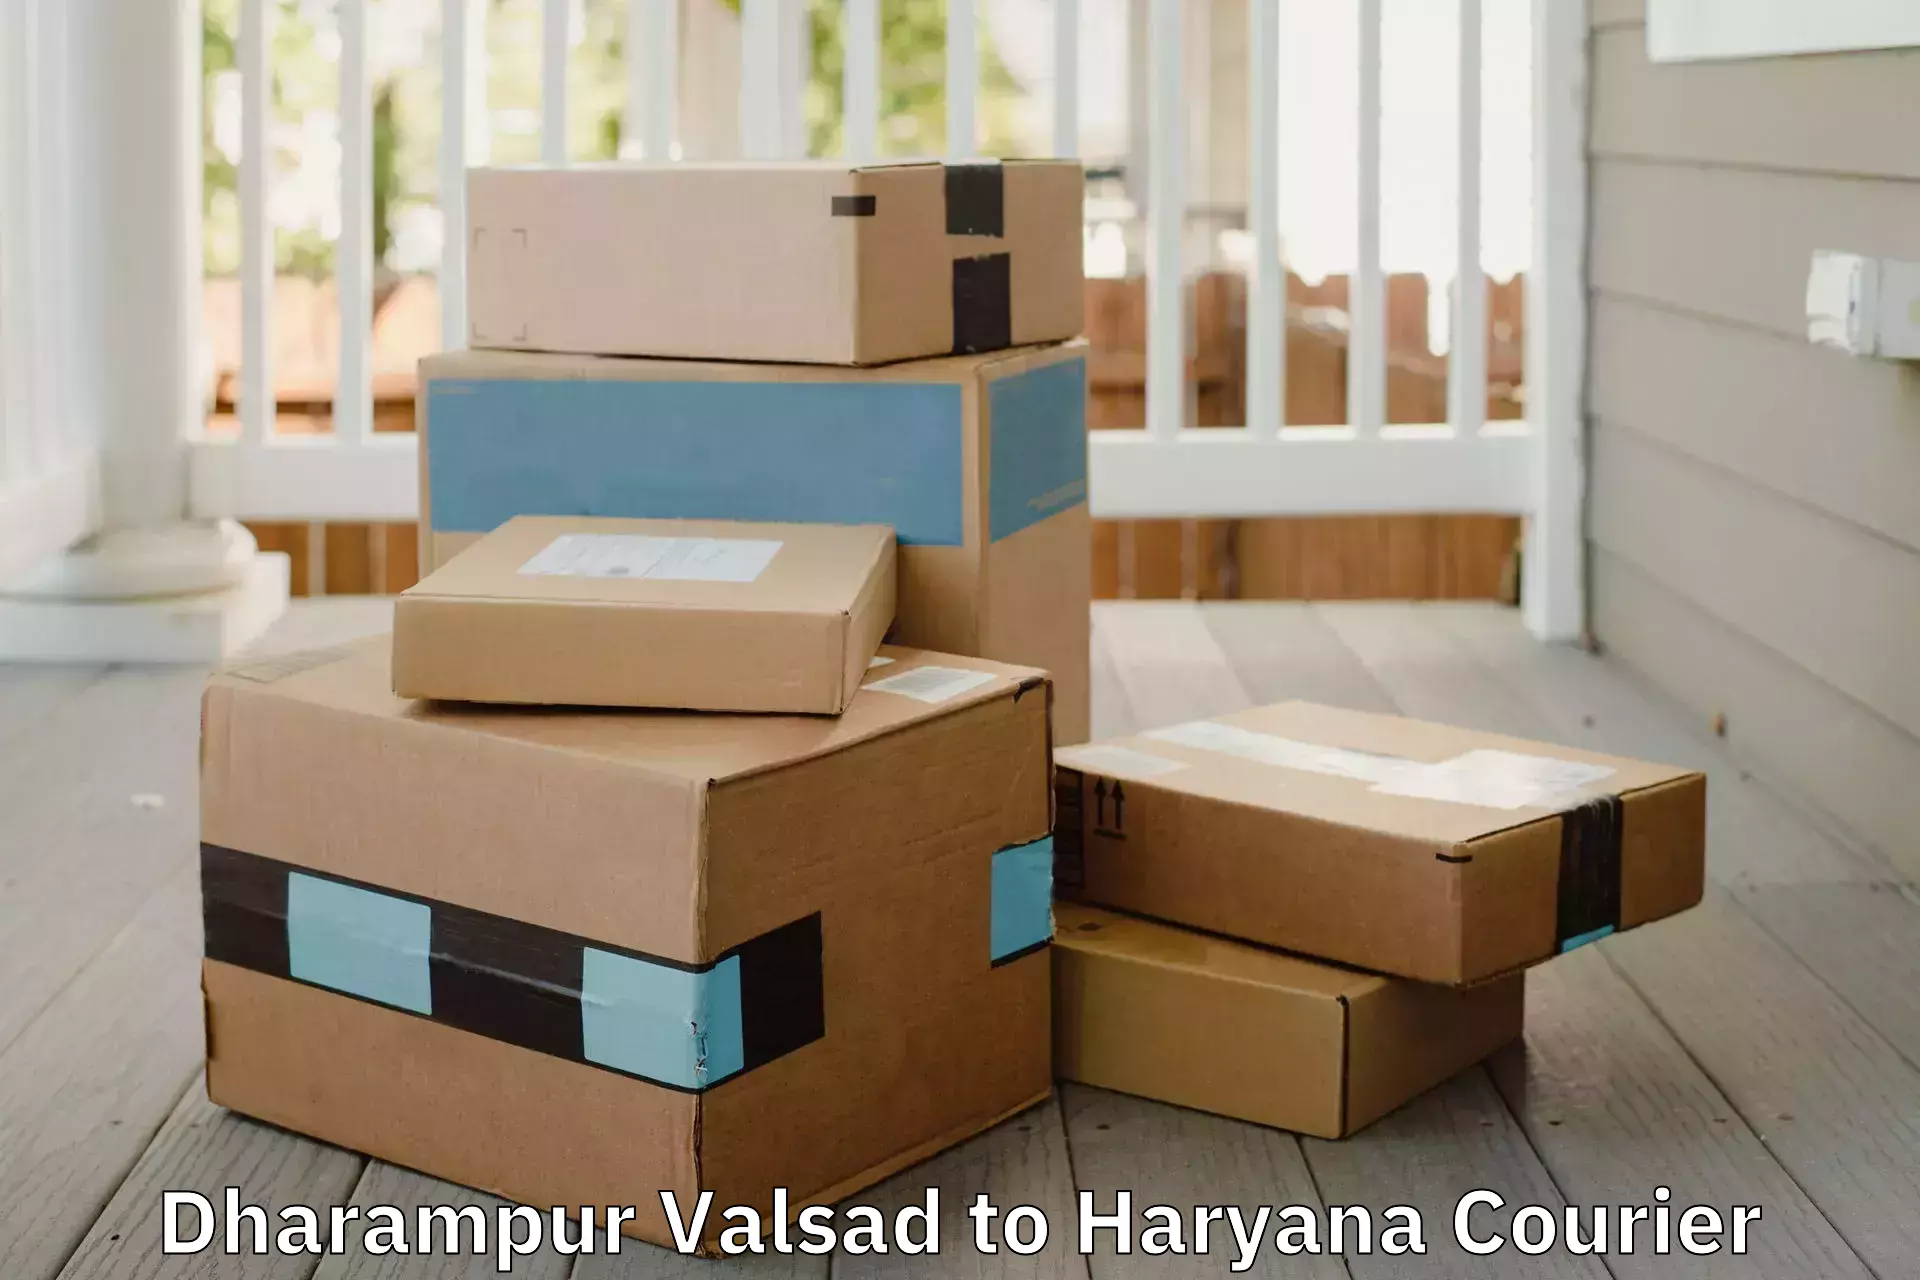 Professional movers in Dharampur Valsad to Bilaspur Haryana